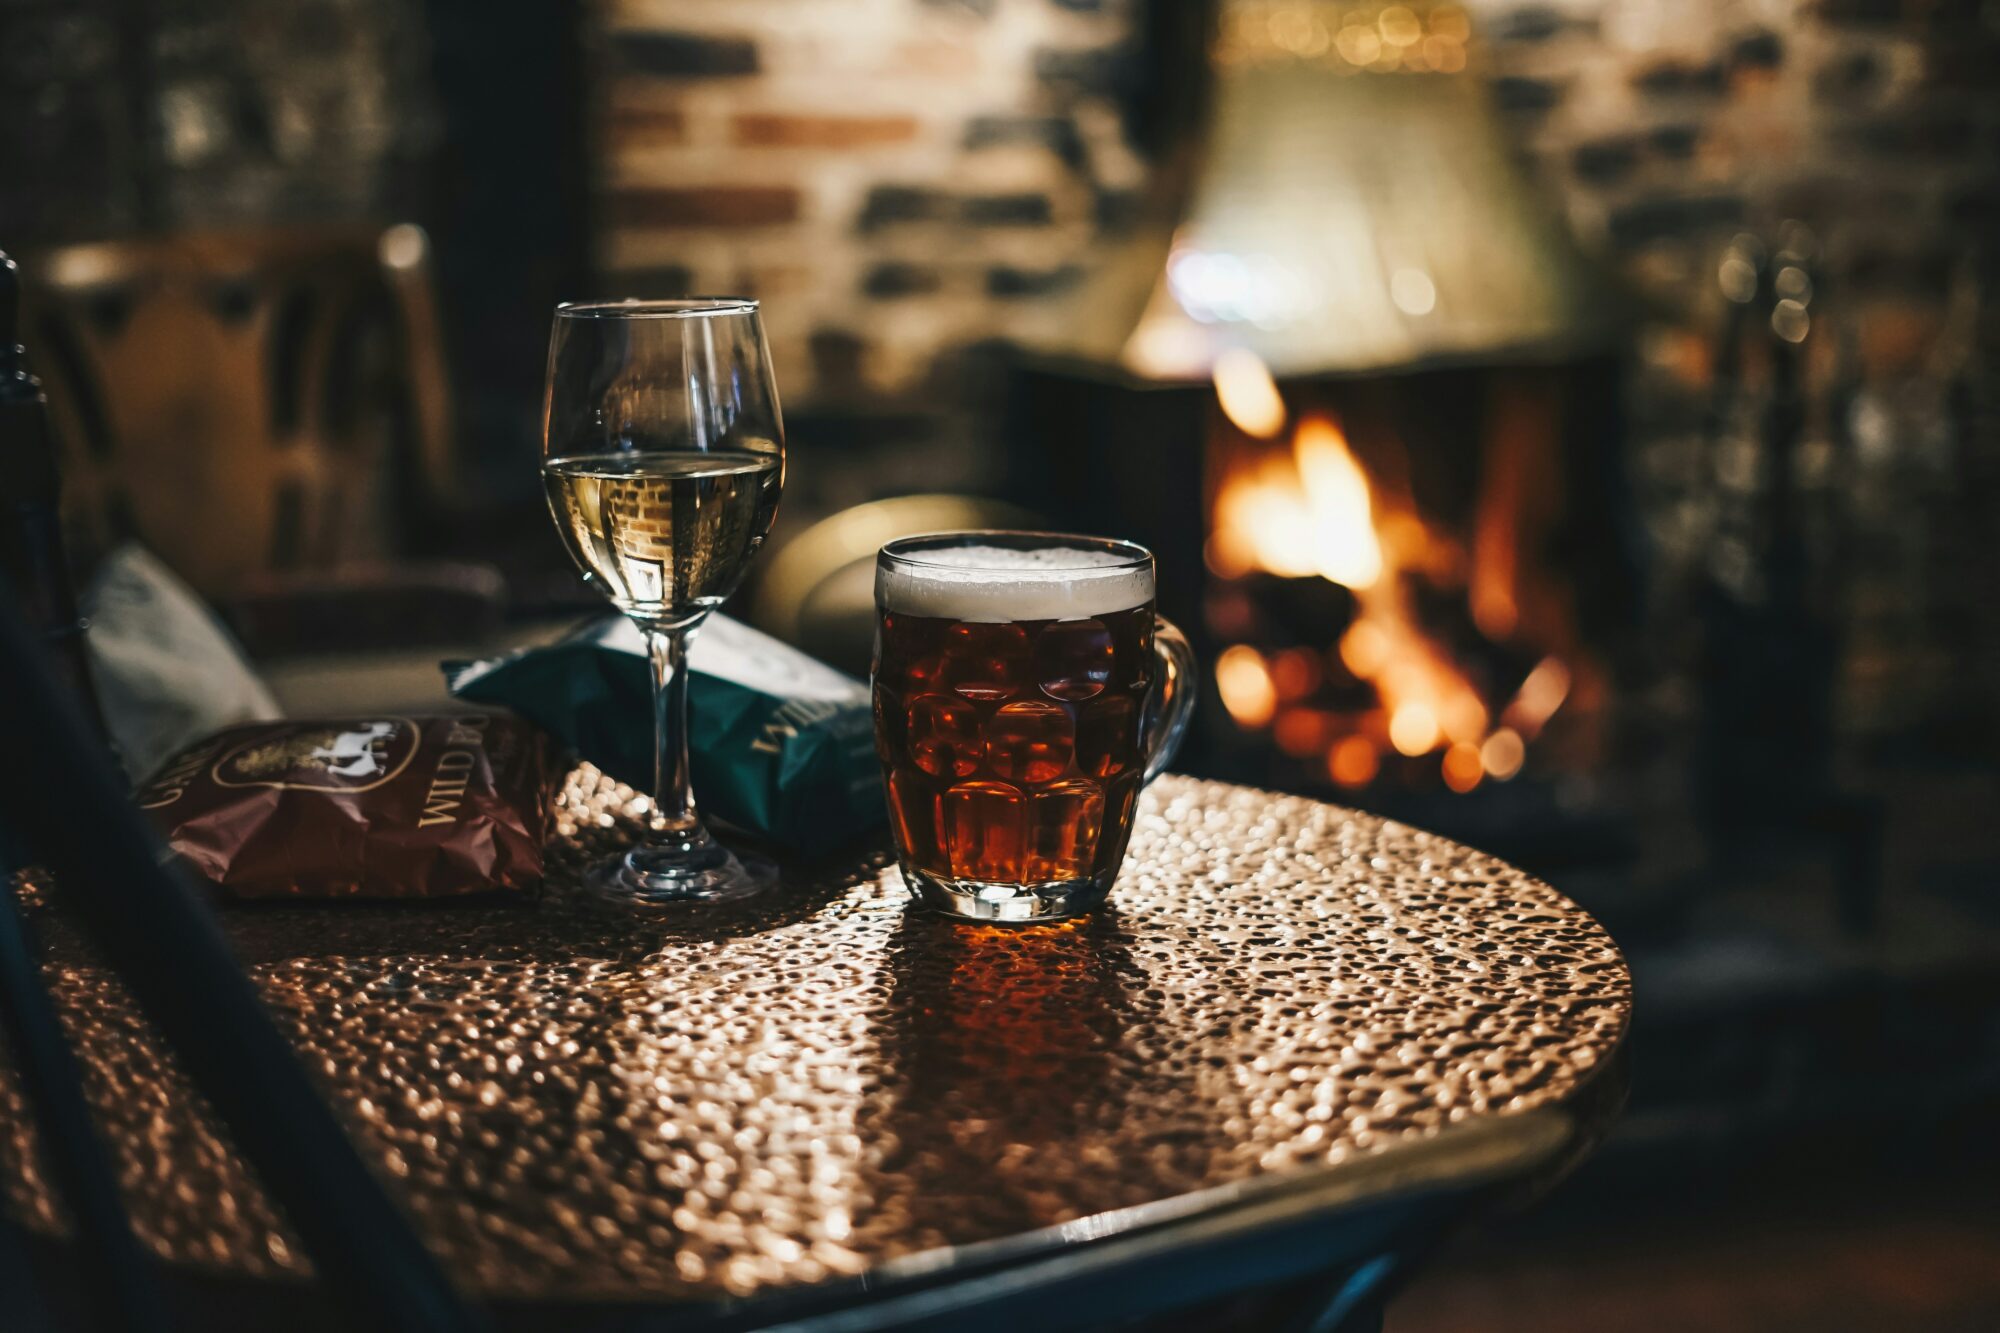 Glass of wine and pint of beer in a pub by the fire